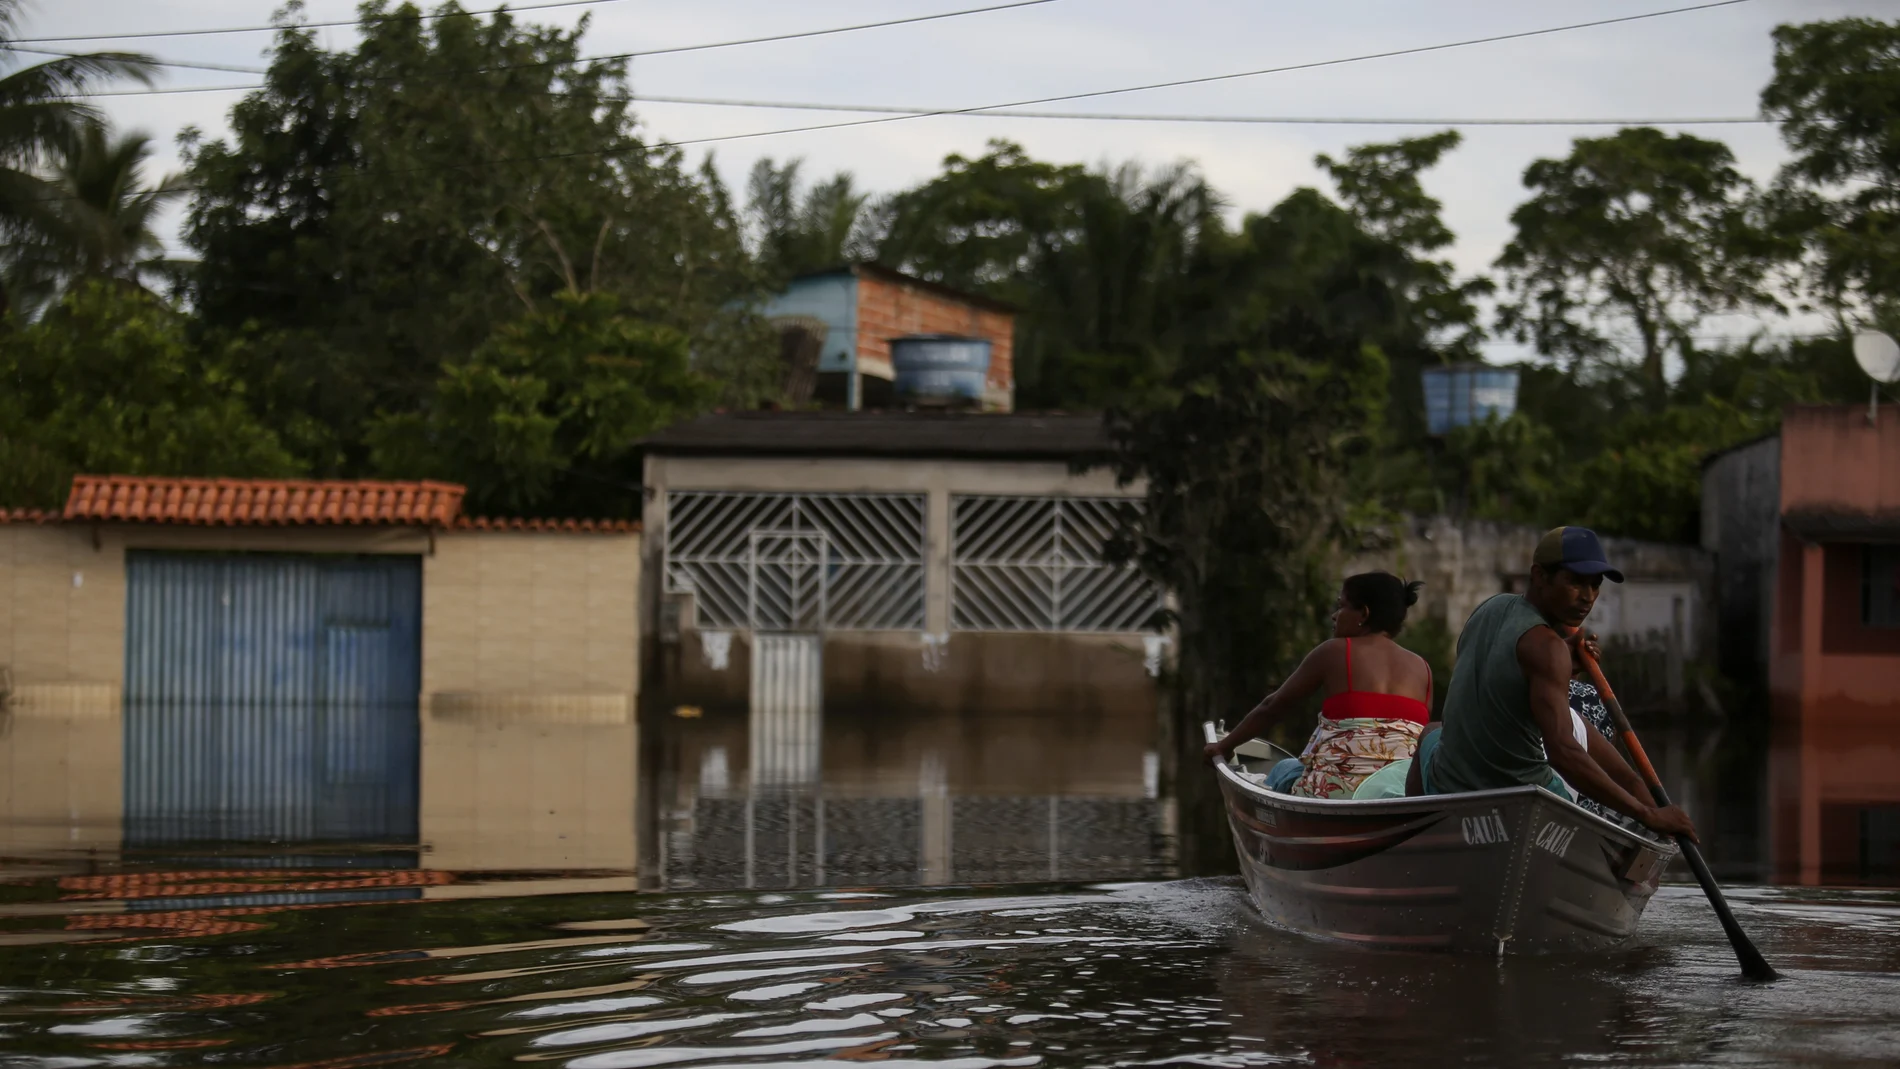 Luzia Barbosa de Oliveira, not pictured, accompanied by family members, is transported on a boat to her home partially submerged by flood waters in Sambaituba, a rural area of Ilheus, Bahia state, Brazil, Dec. 29, 2021. Over 100 cities in the northeastern Brazilian state of Bahia are in a state of emergency because of flooding due to heavy rains that have been pounding the region since the end of November. (AP Photo/Raphael Muller)